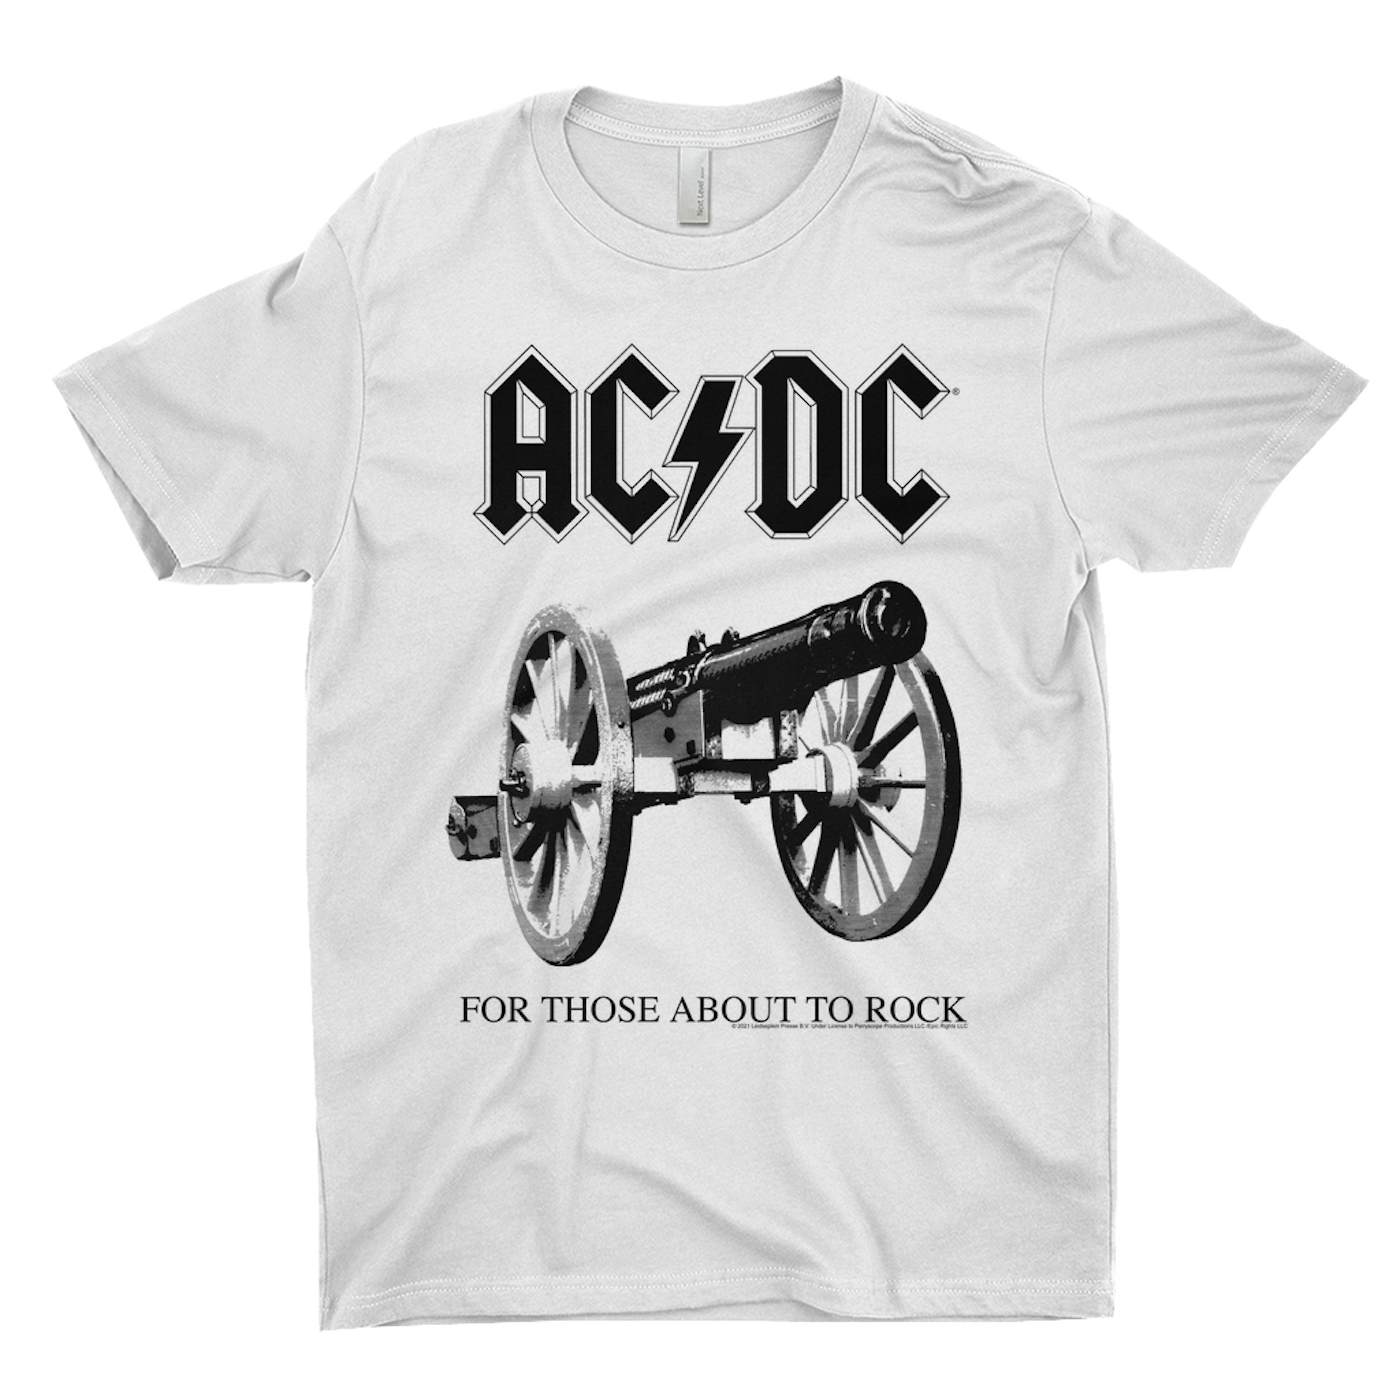 For To Image | Shirt Those Black About T-Shirt AC/DC Rock Cannon